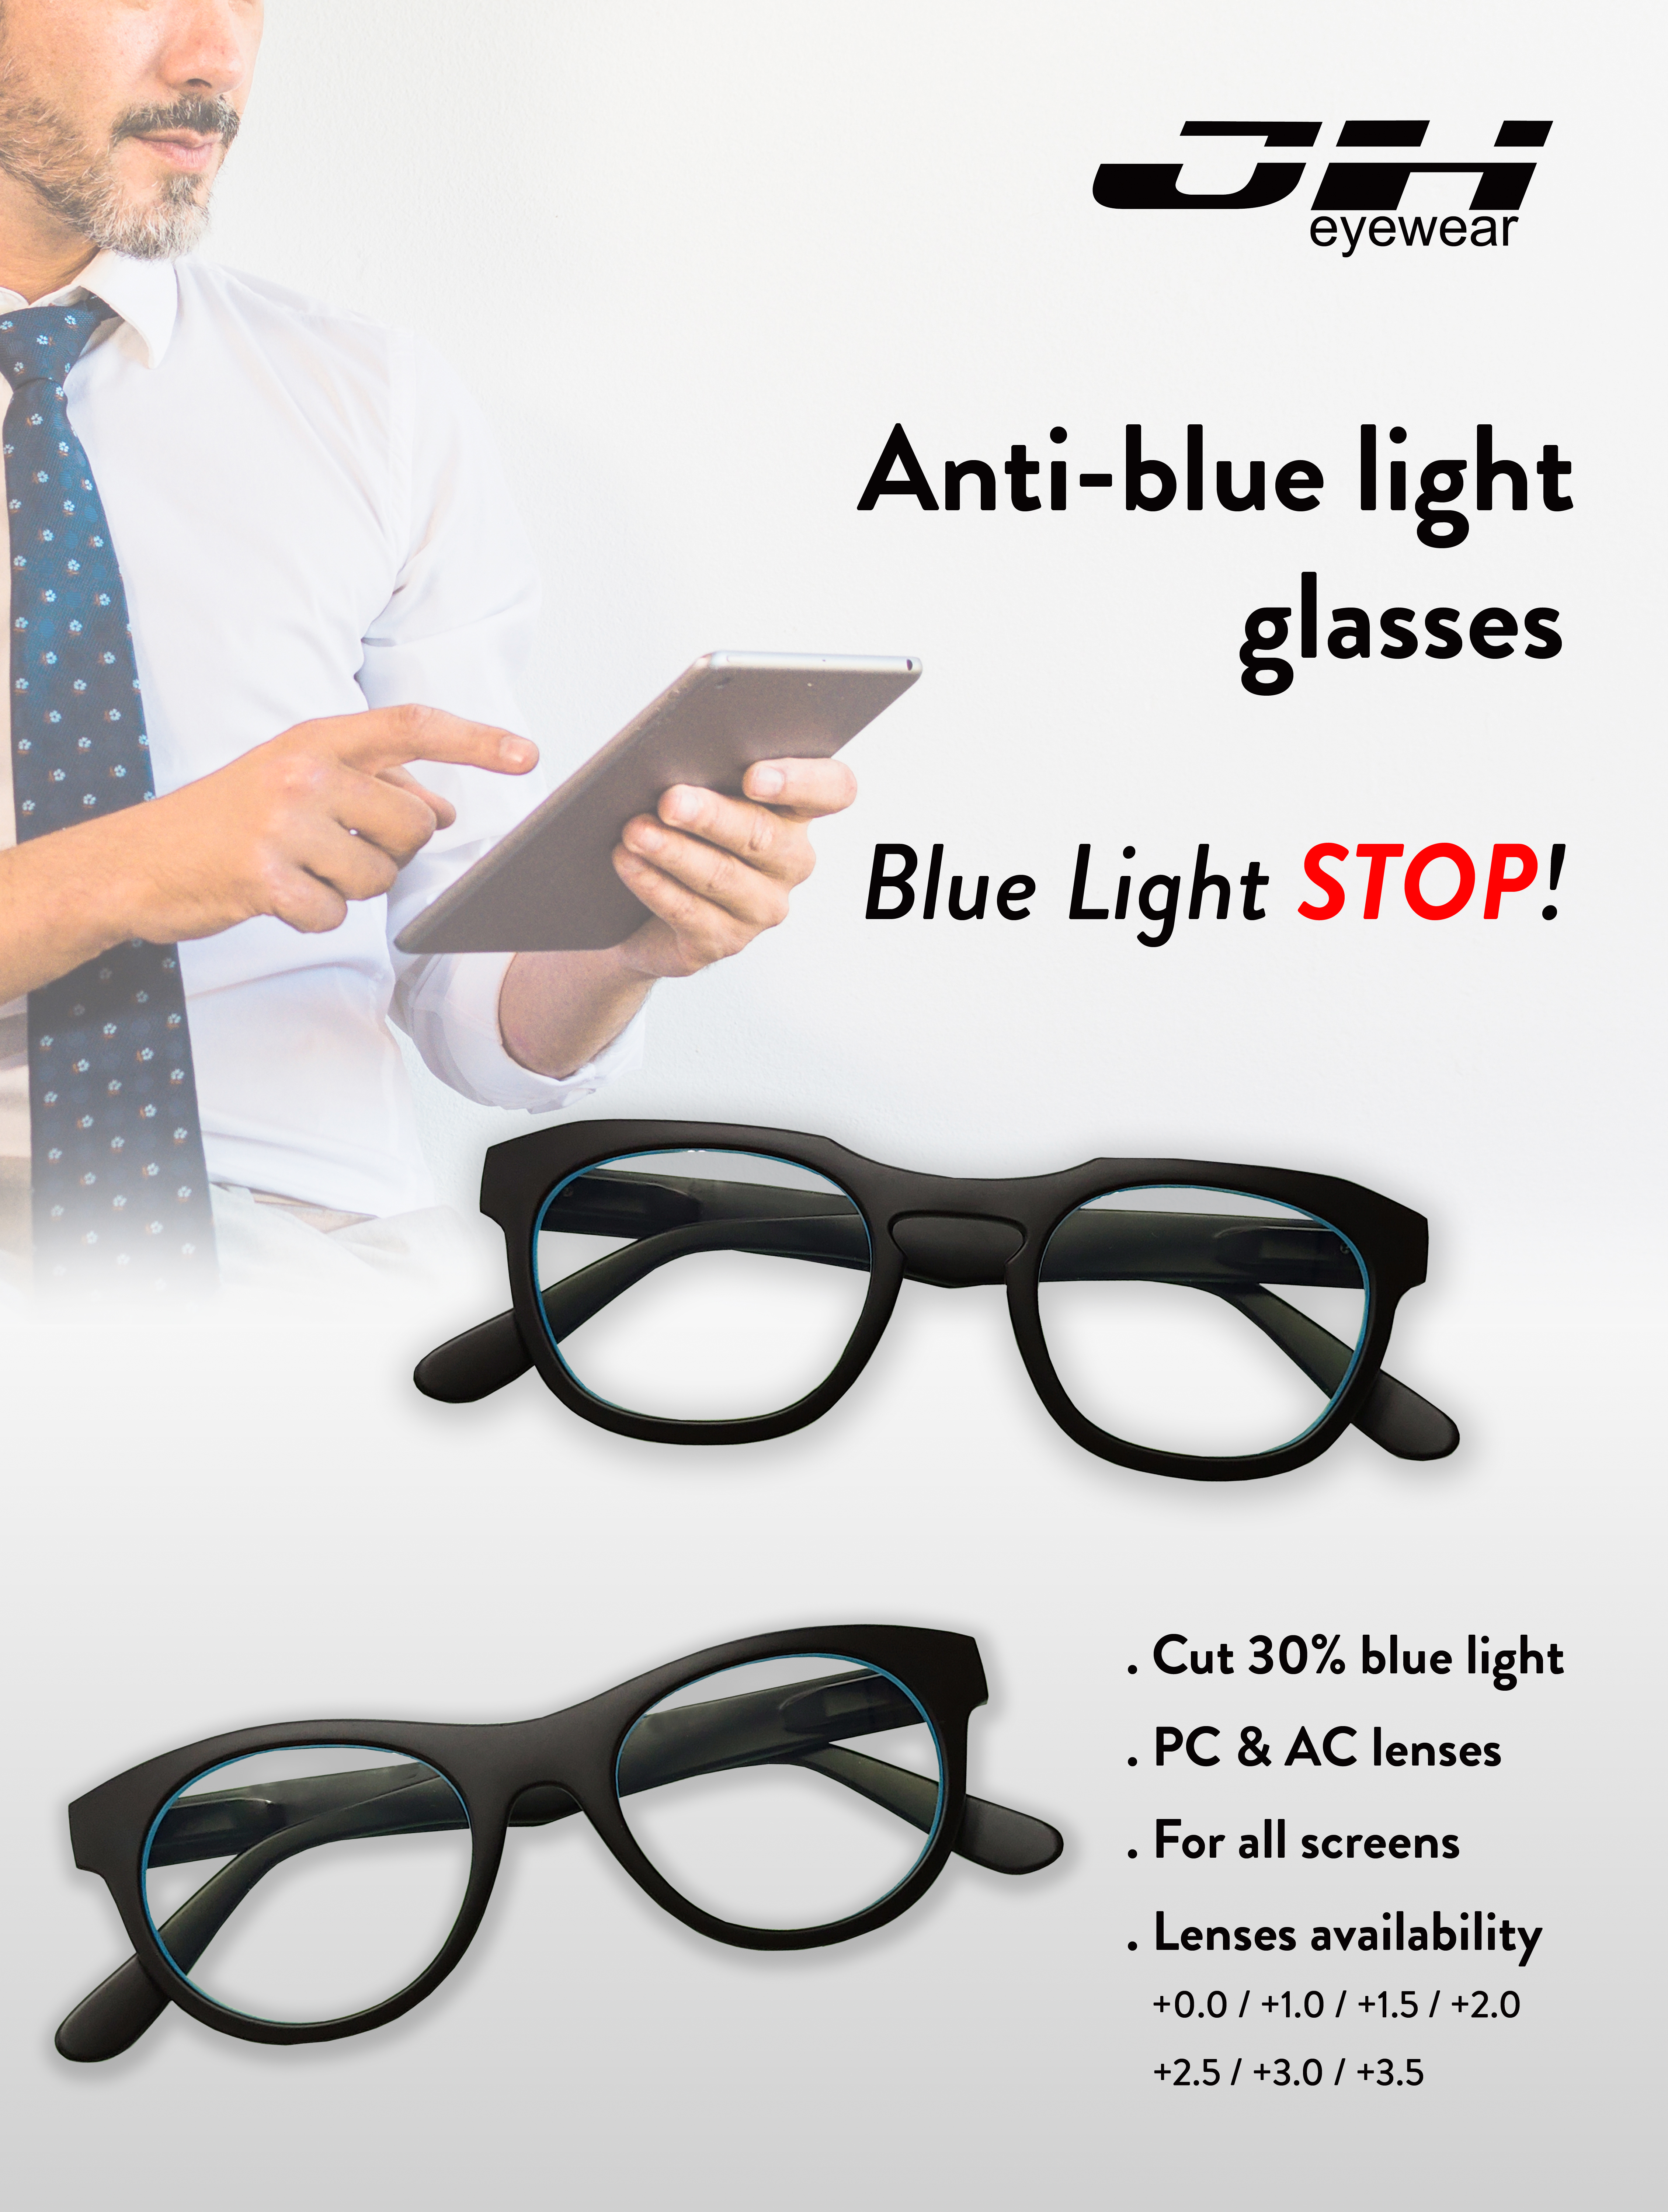 About anti-blue light glasses-MADE IN 